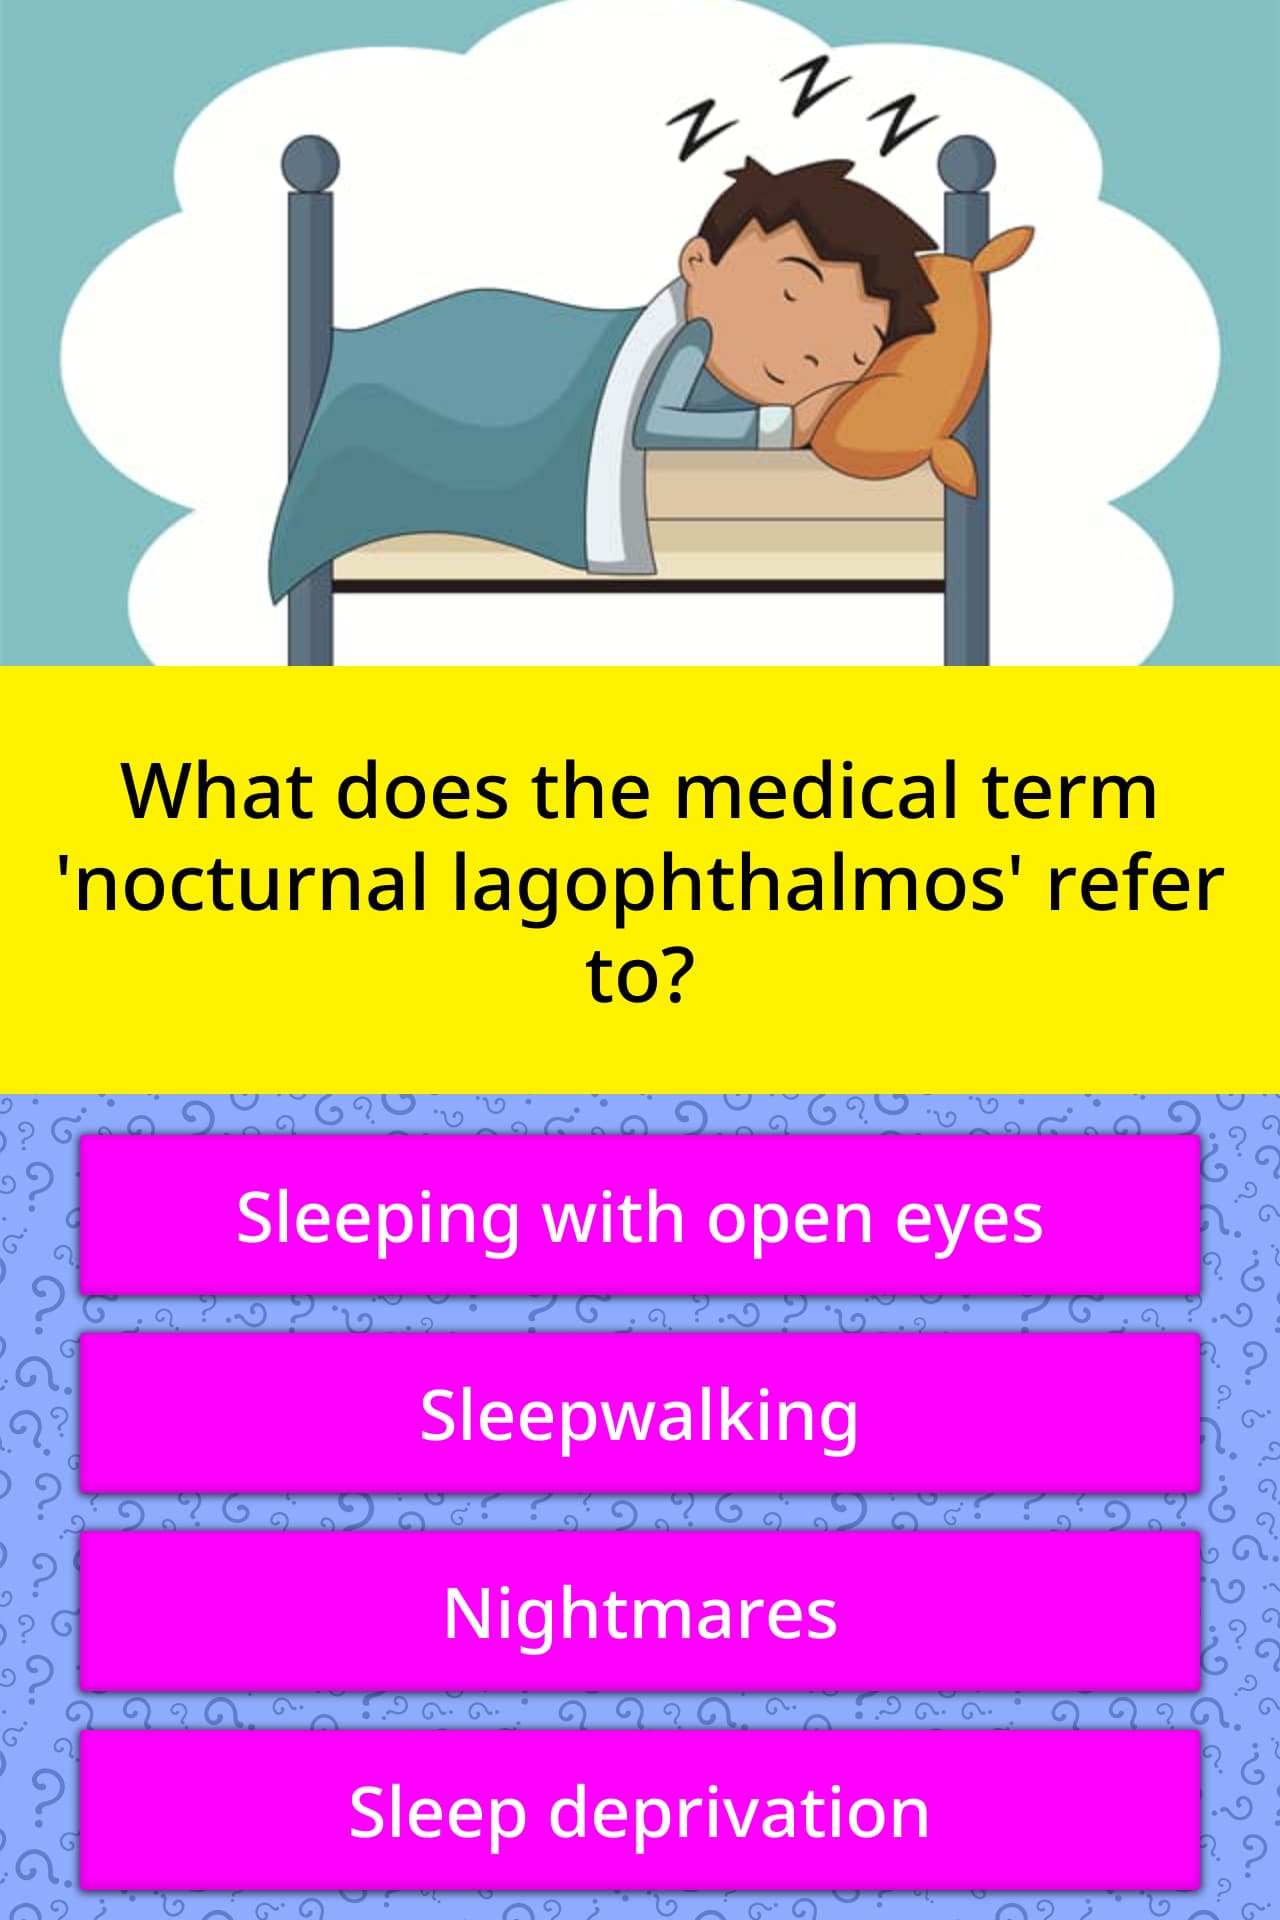 nocturnal lagophthalmos also called